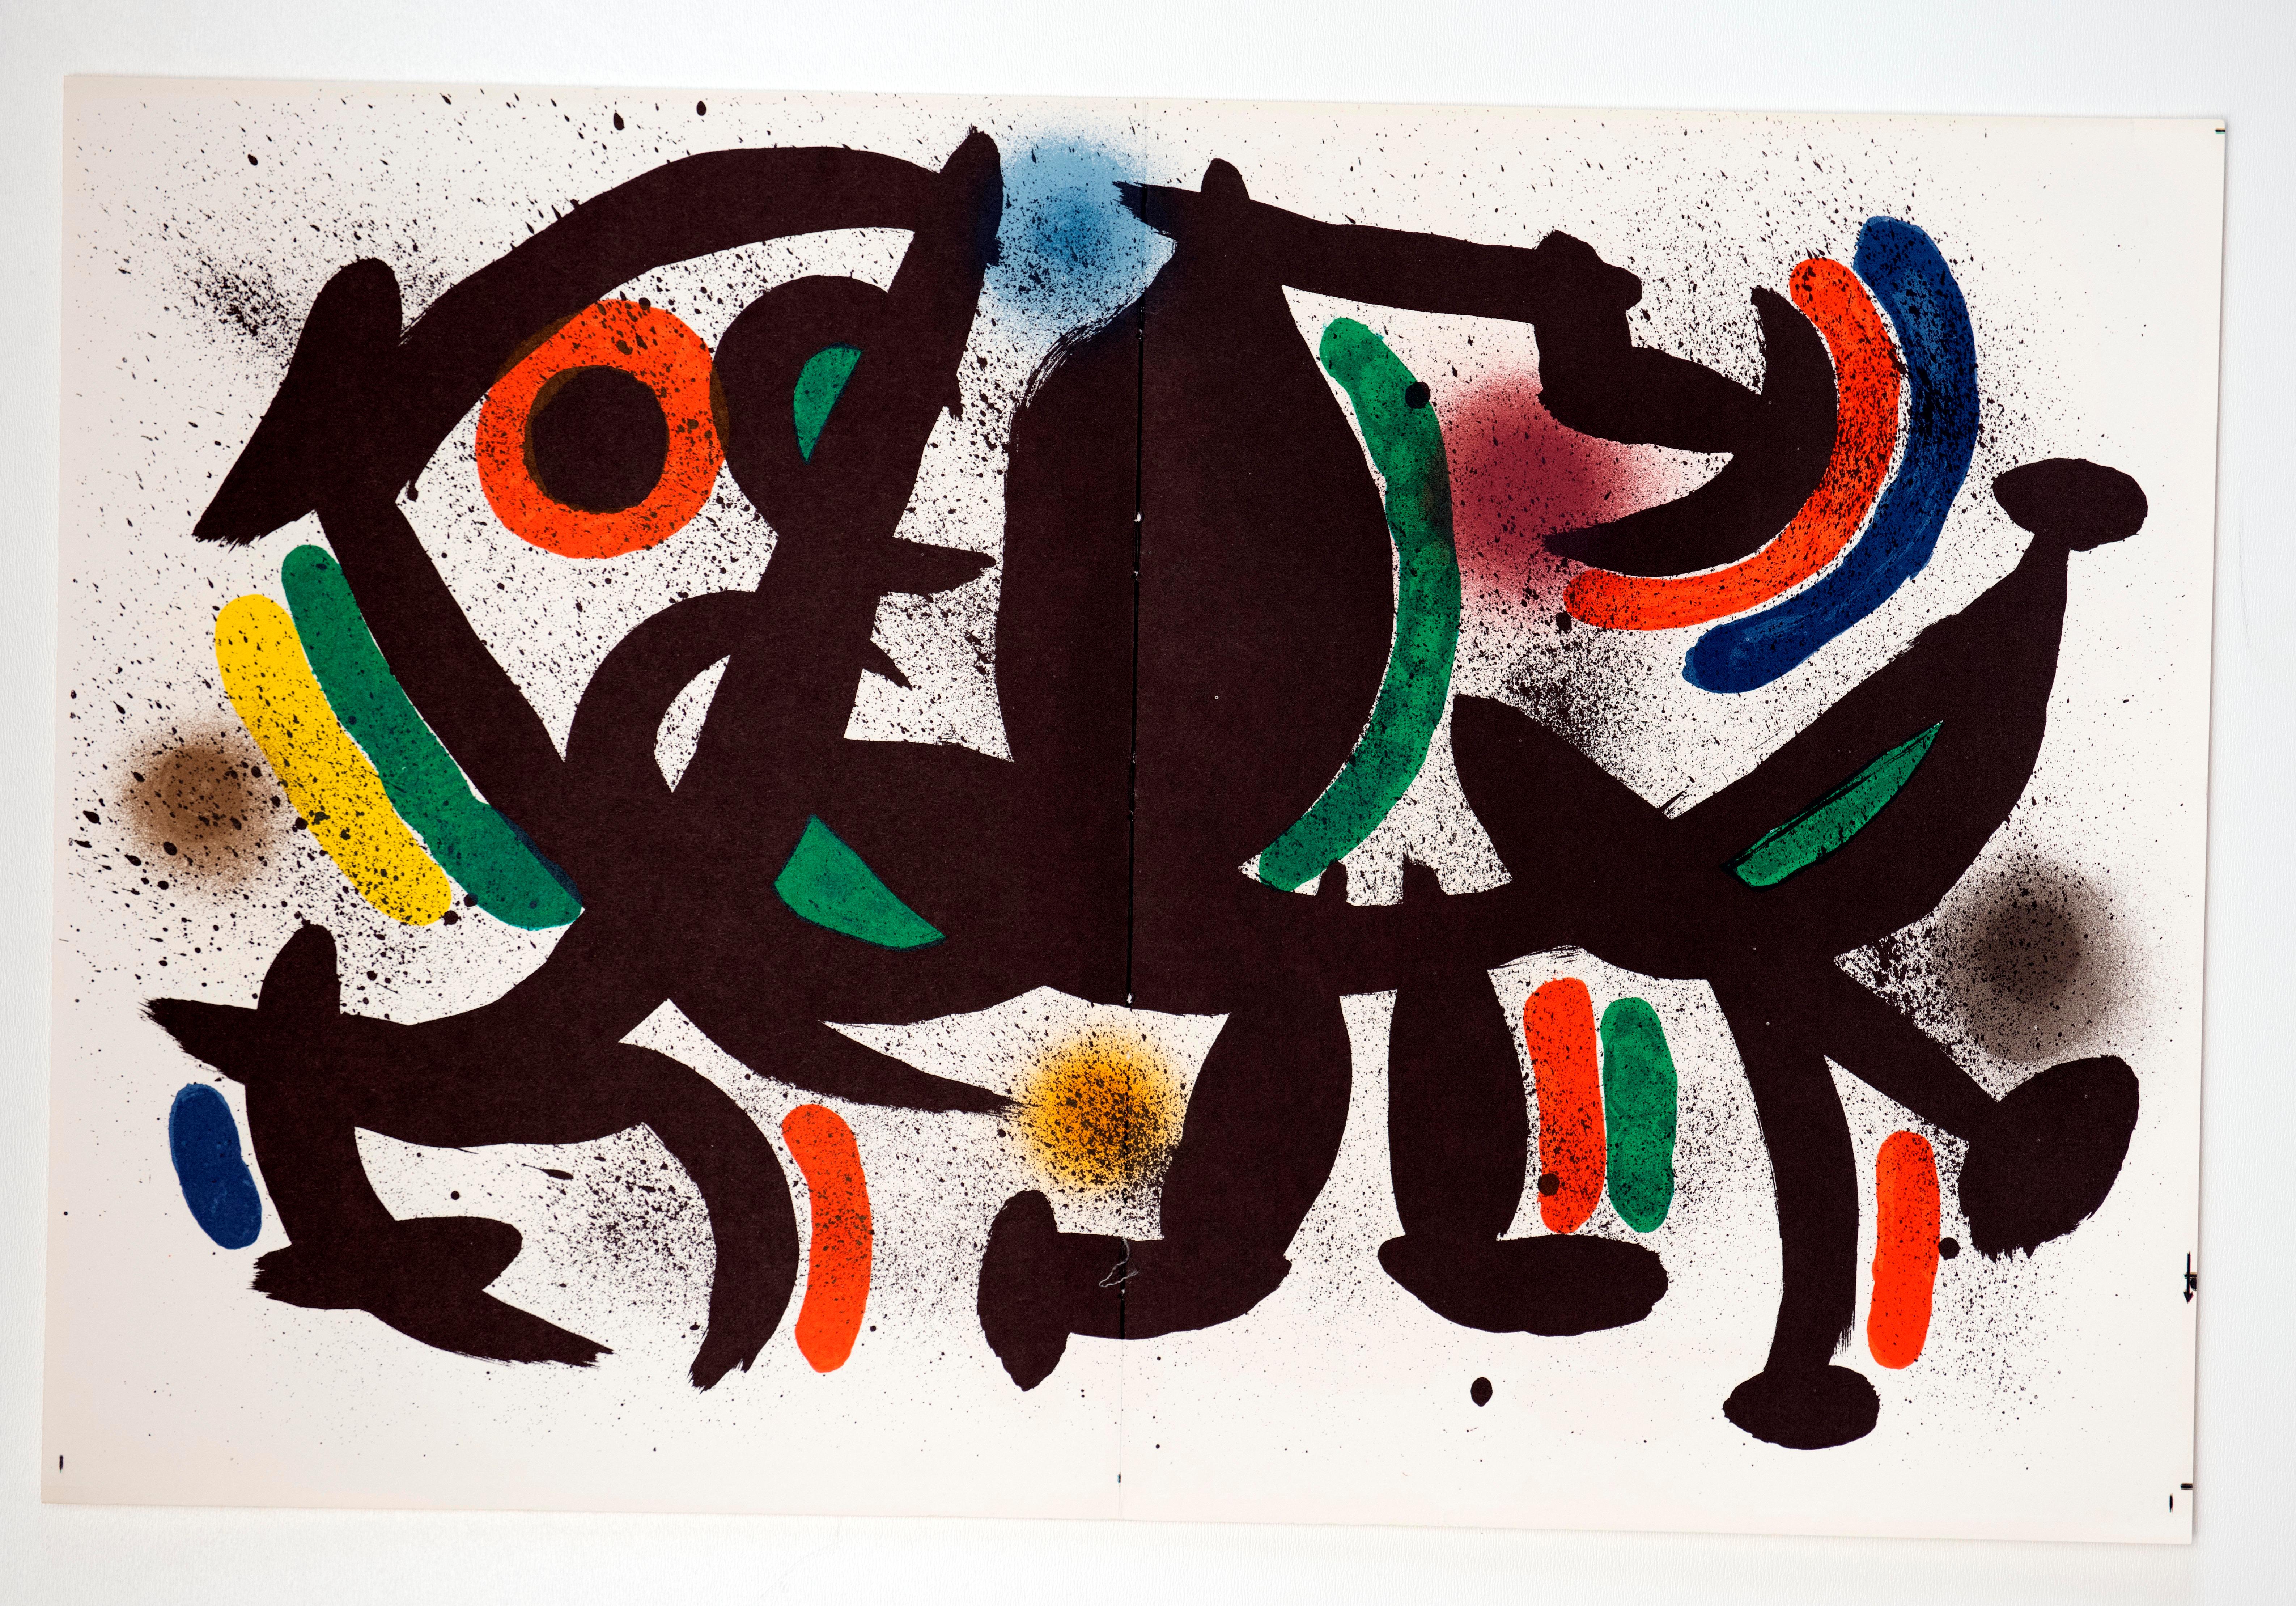 "Litografía Original VIII" - Joan Miró.

Abstract Expressionism, Surrealism, Dada, Experimental, Avant-garde.

The work embraces dream imagery and “psychic automatism".

Envisioning his artistic pursuit as a challenge to traditional painting and an